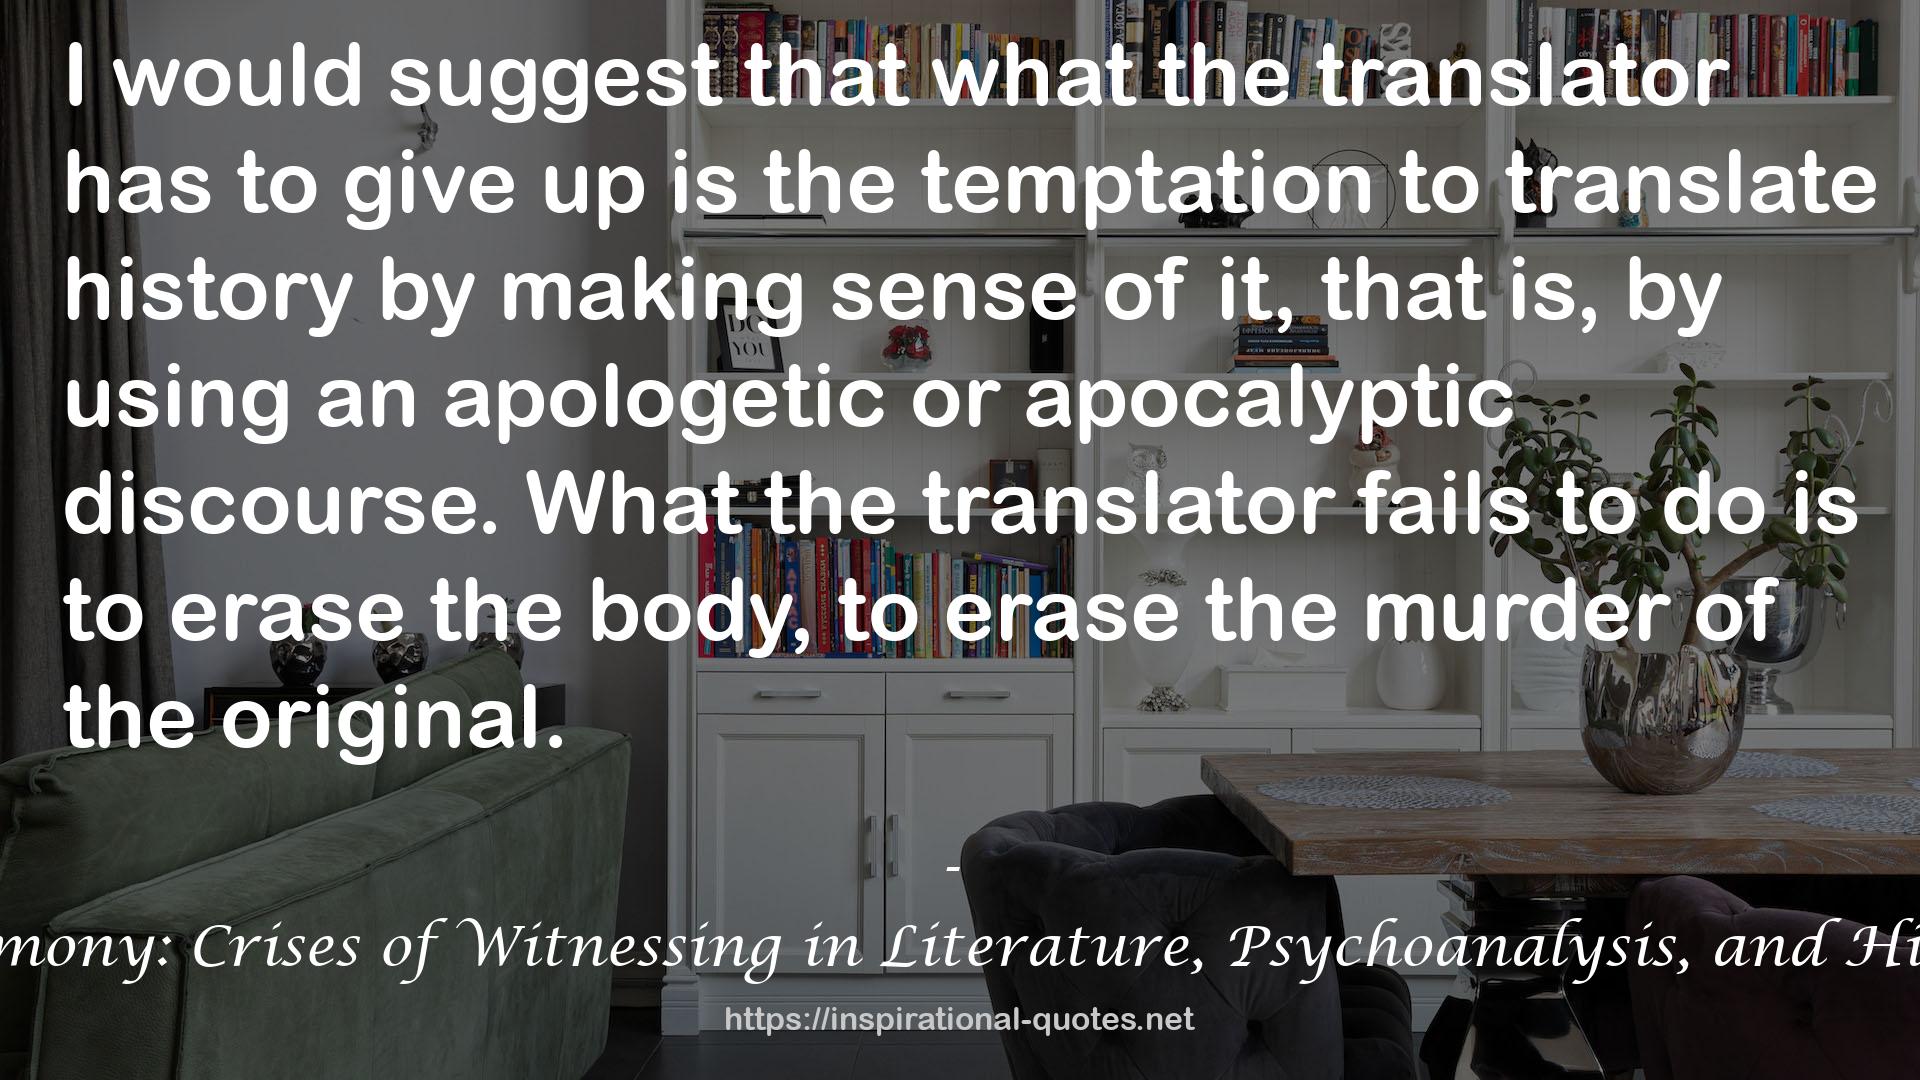 Testimony: Crises of Witnessing in Literature, Psychoanalysis, and History QUOTES